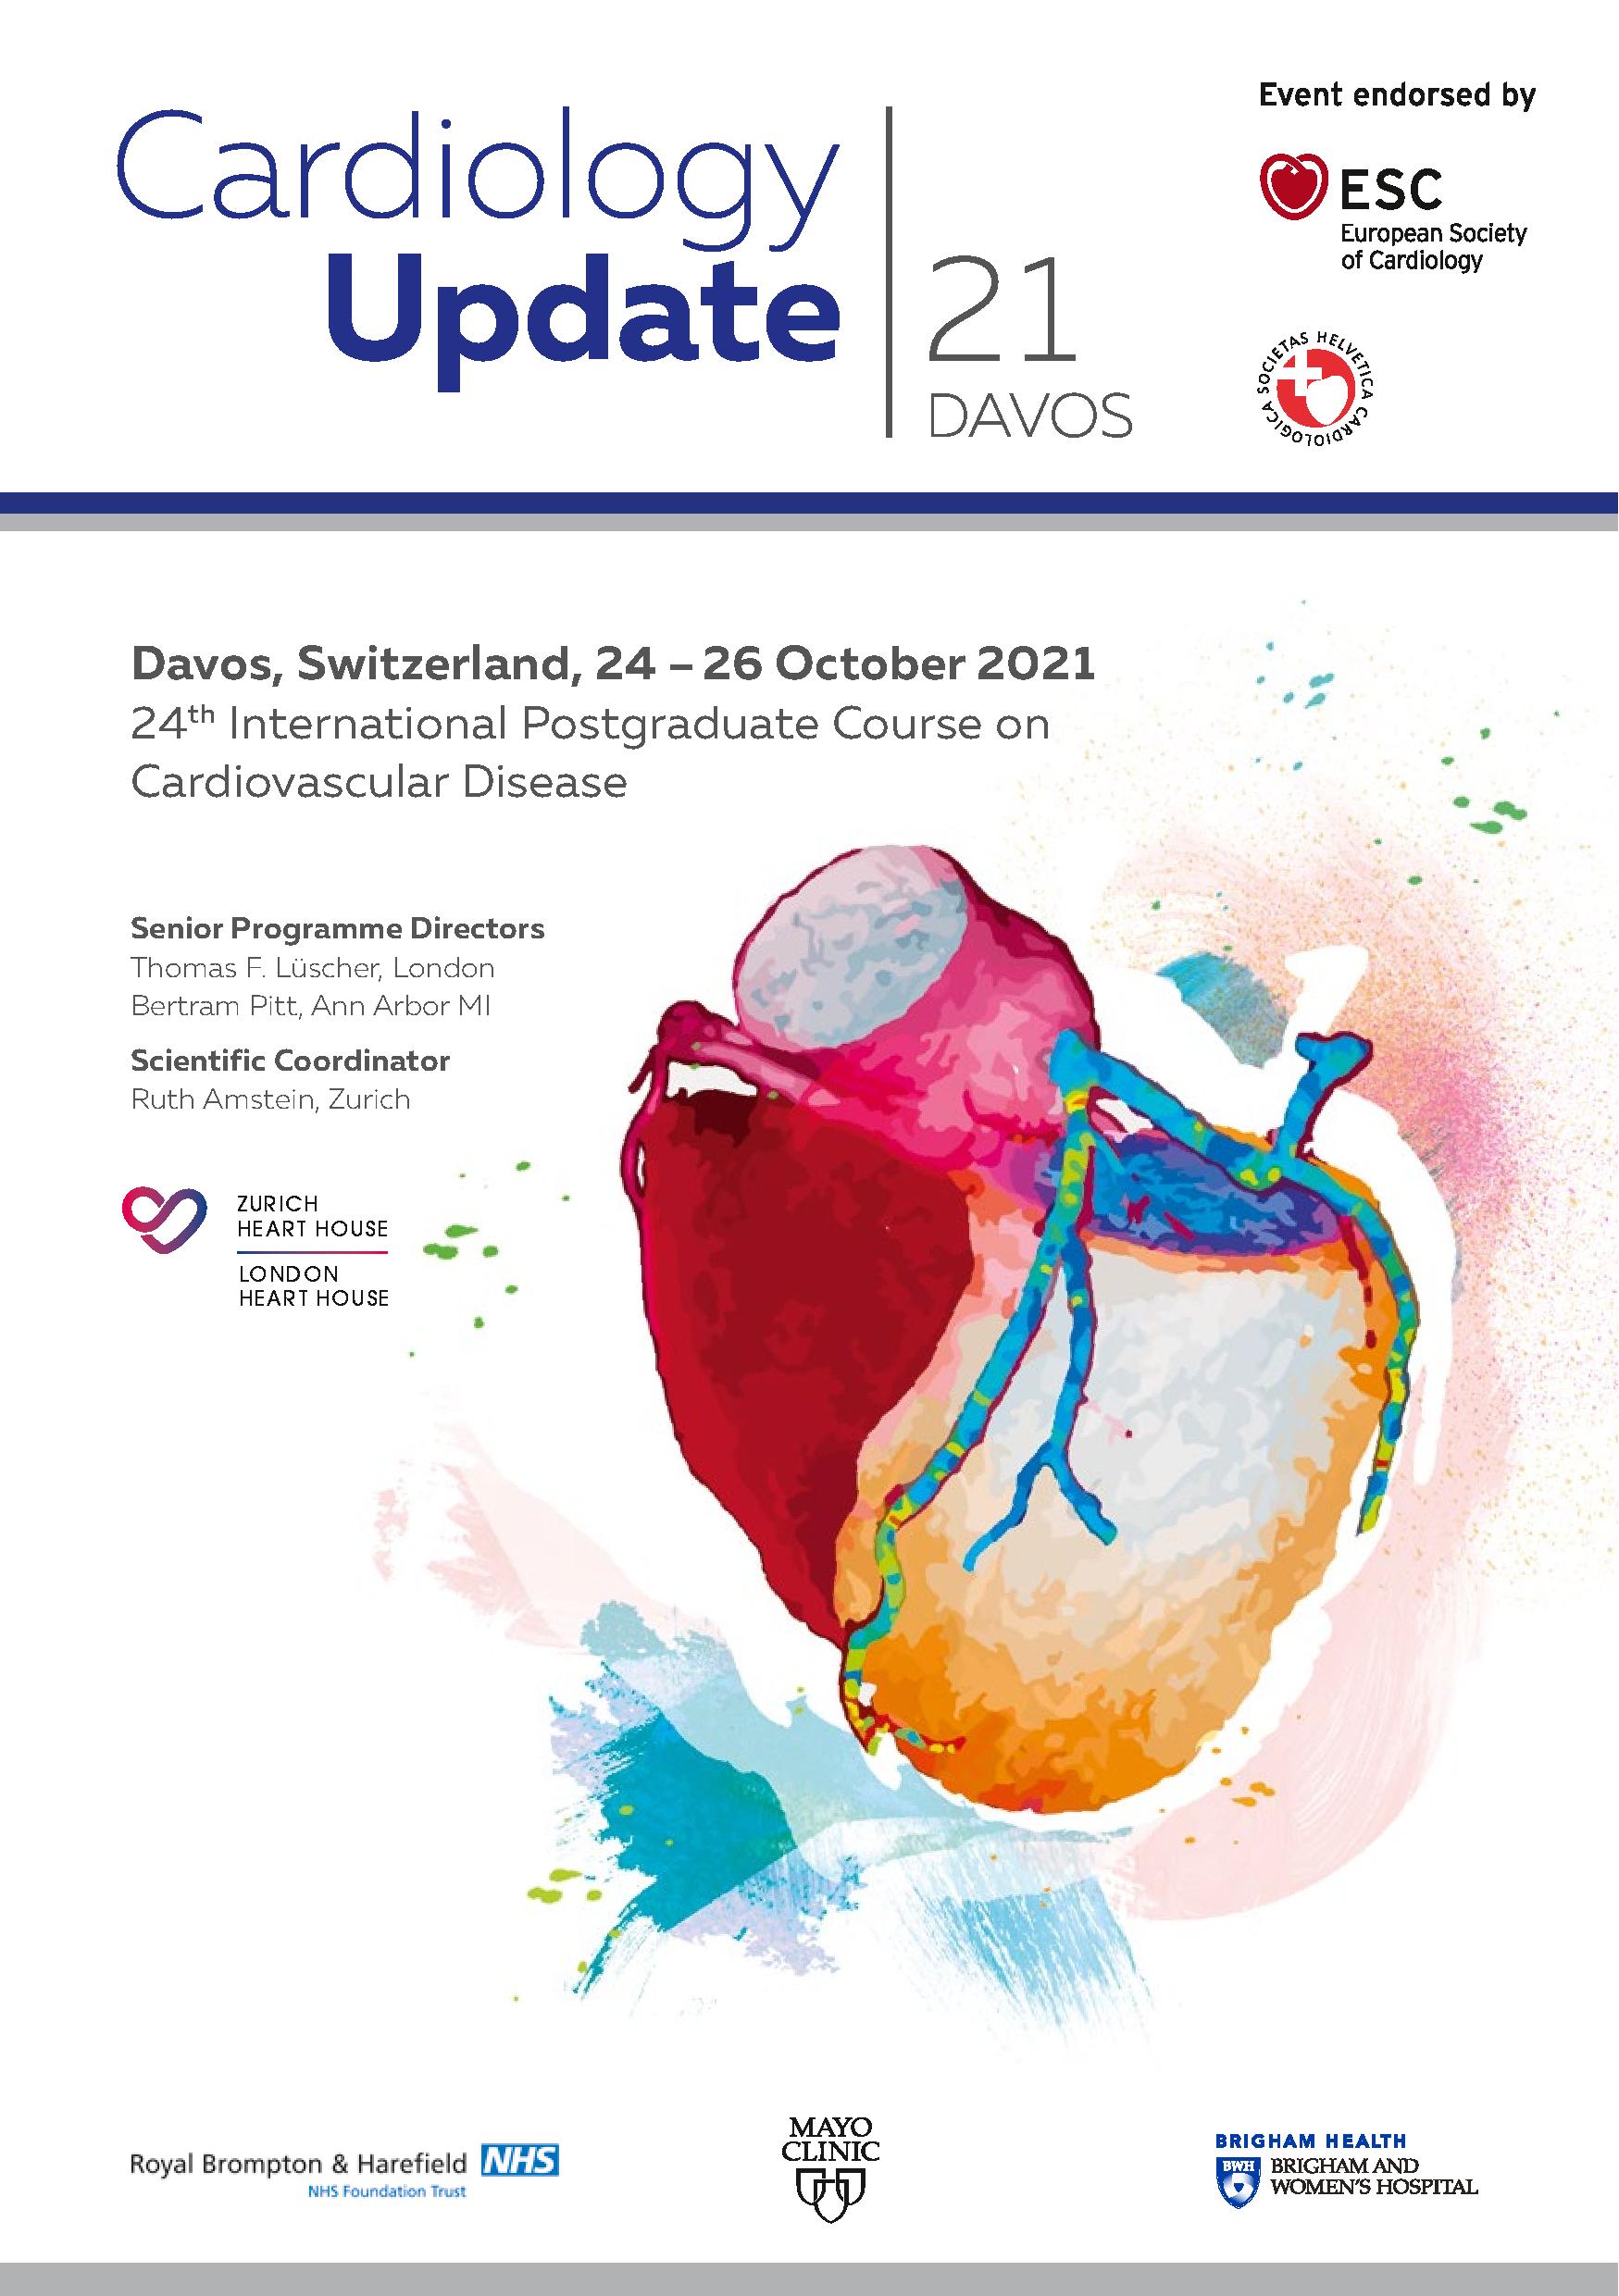 Cardiology Update Davos 2021